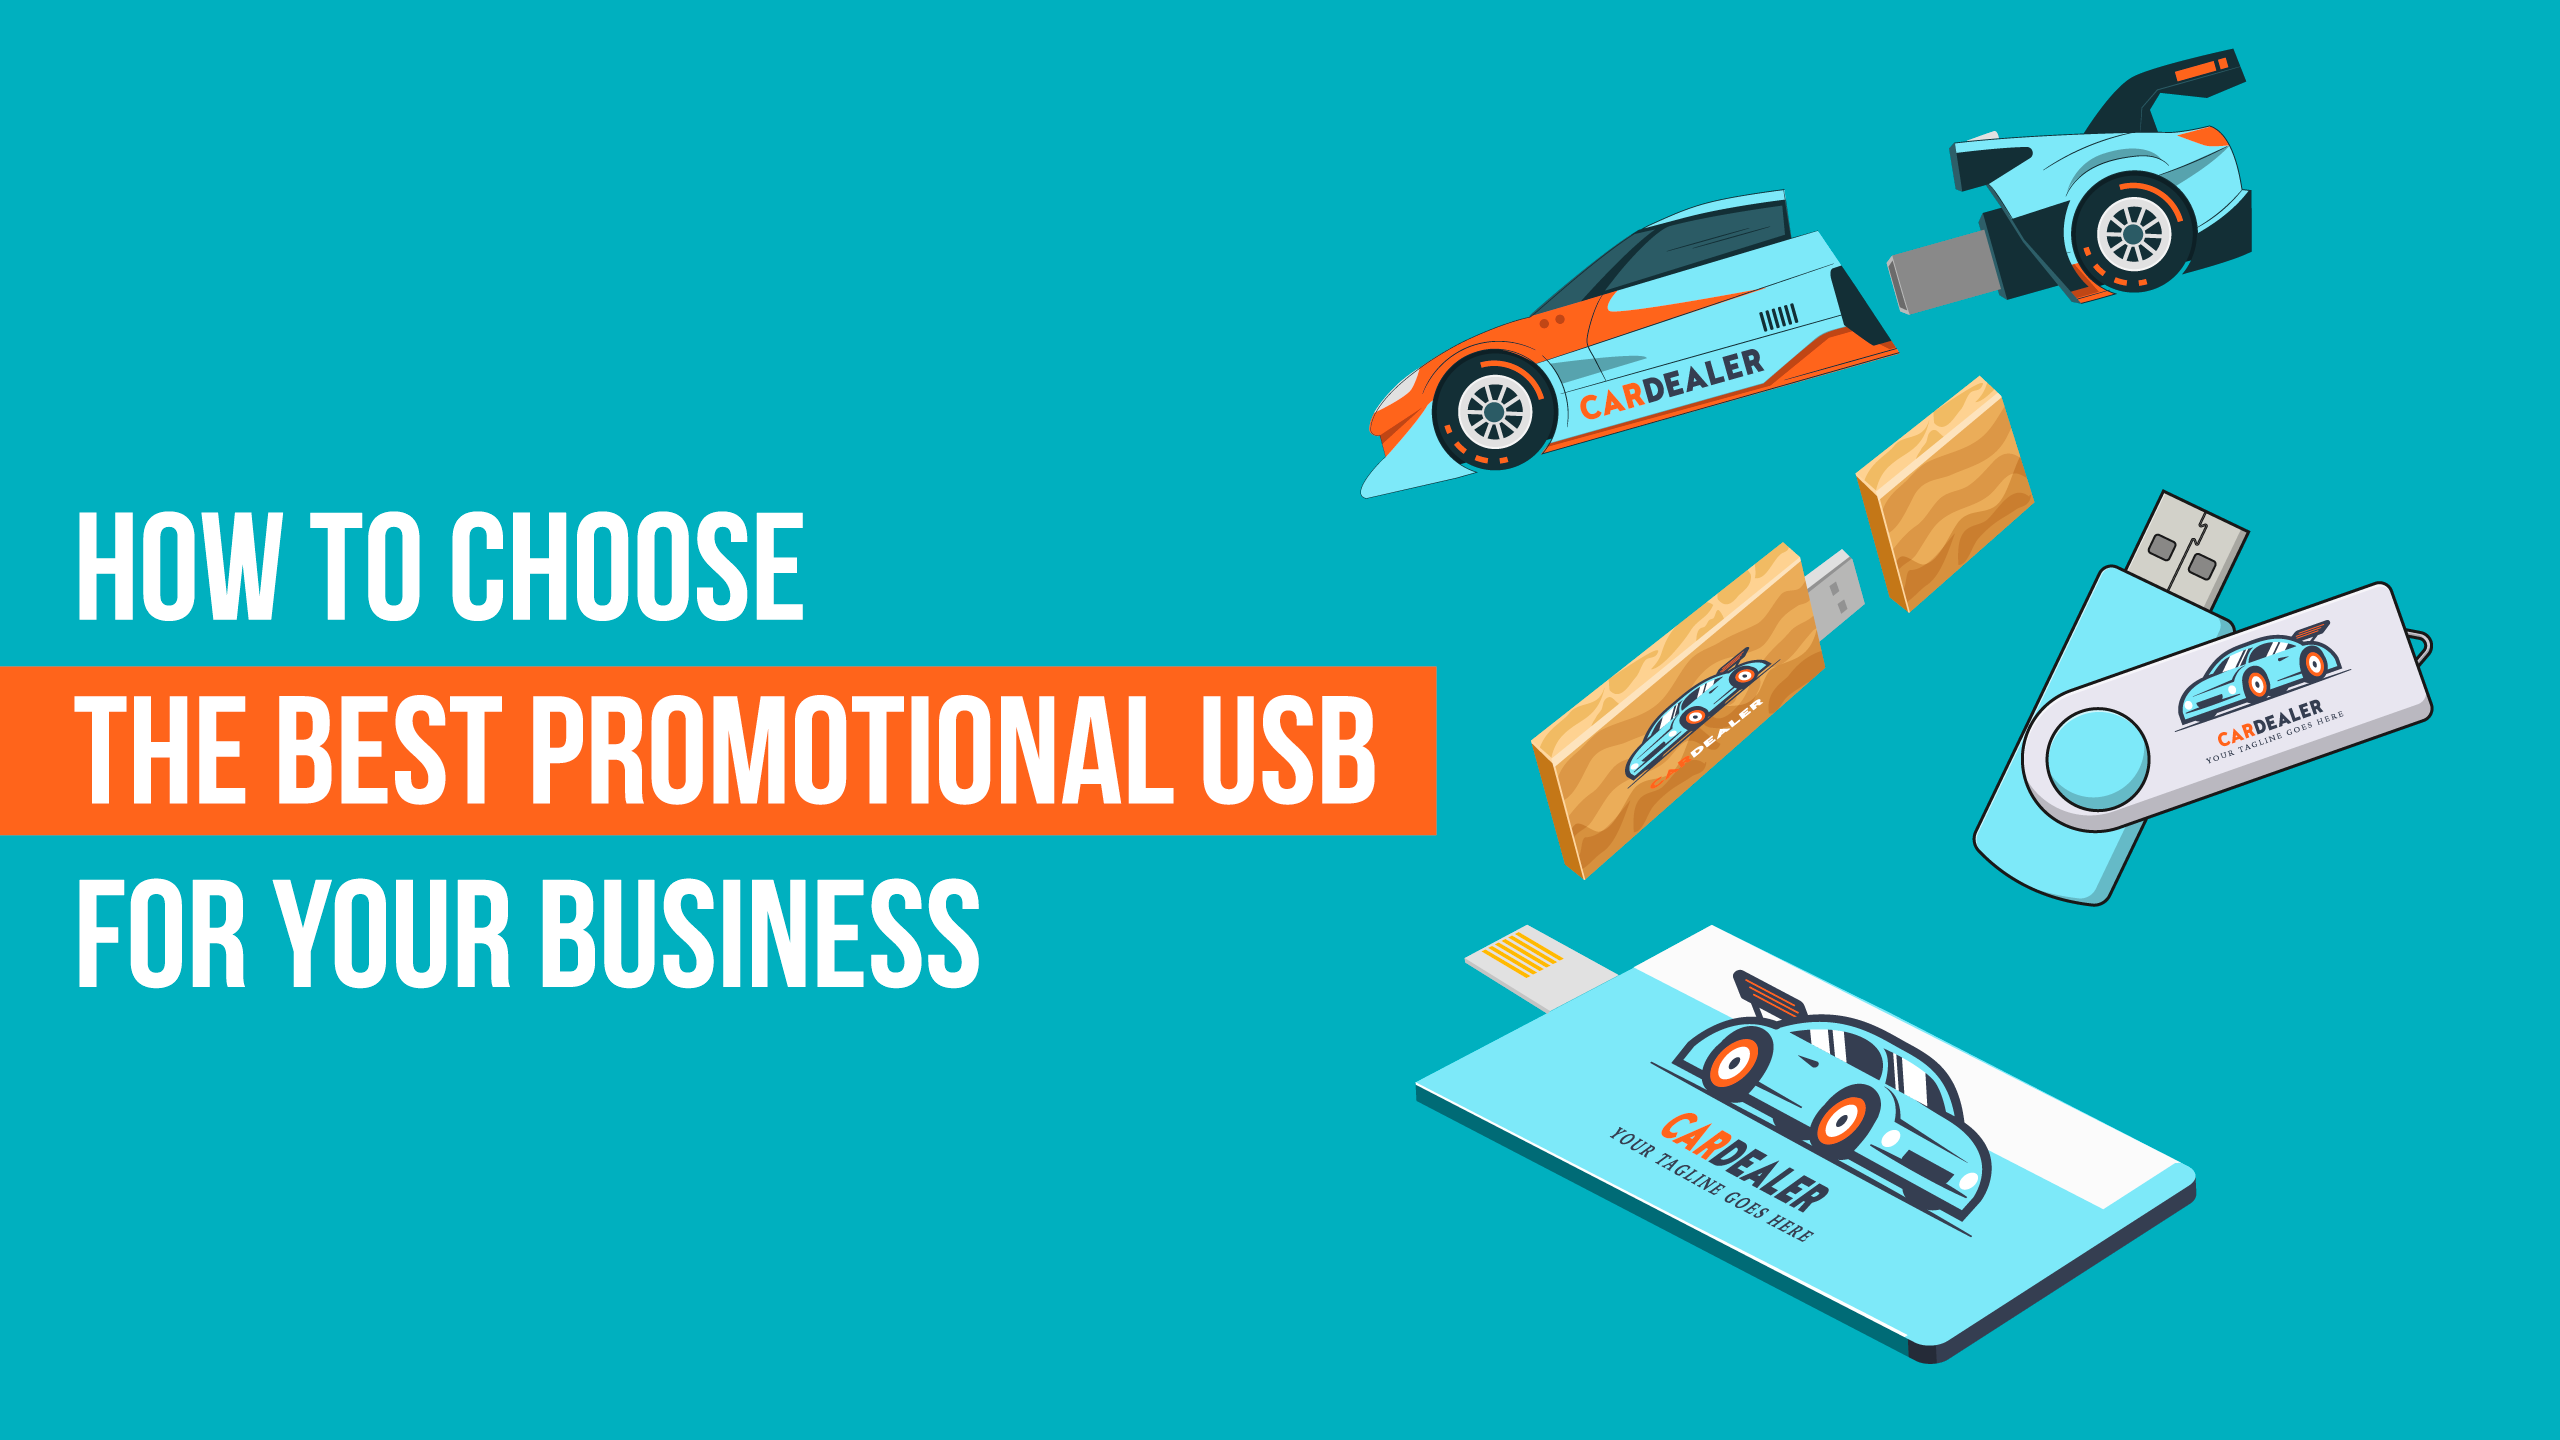 How To Choose the Best Promotional USB for Your Business